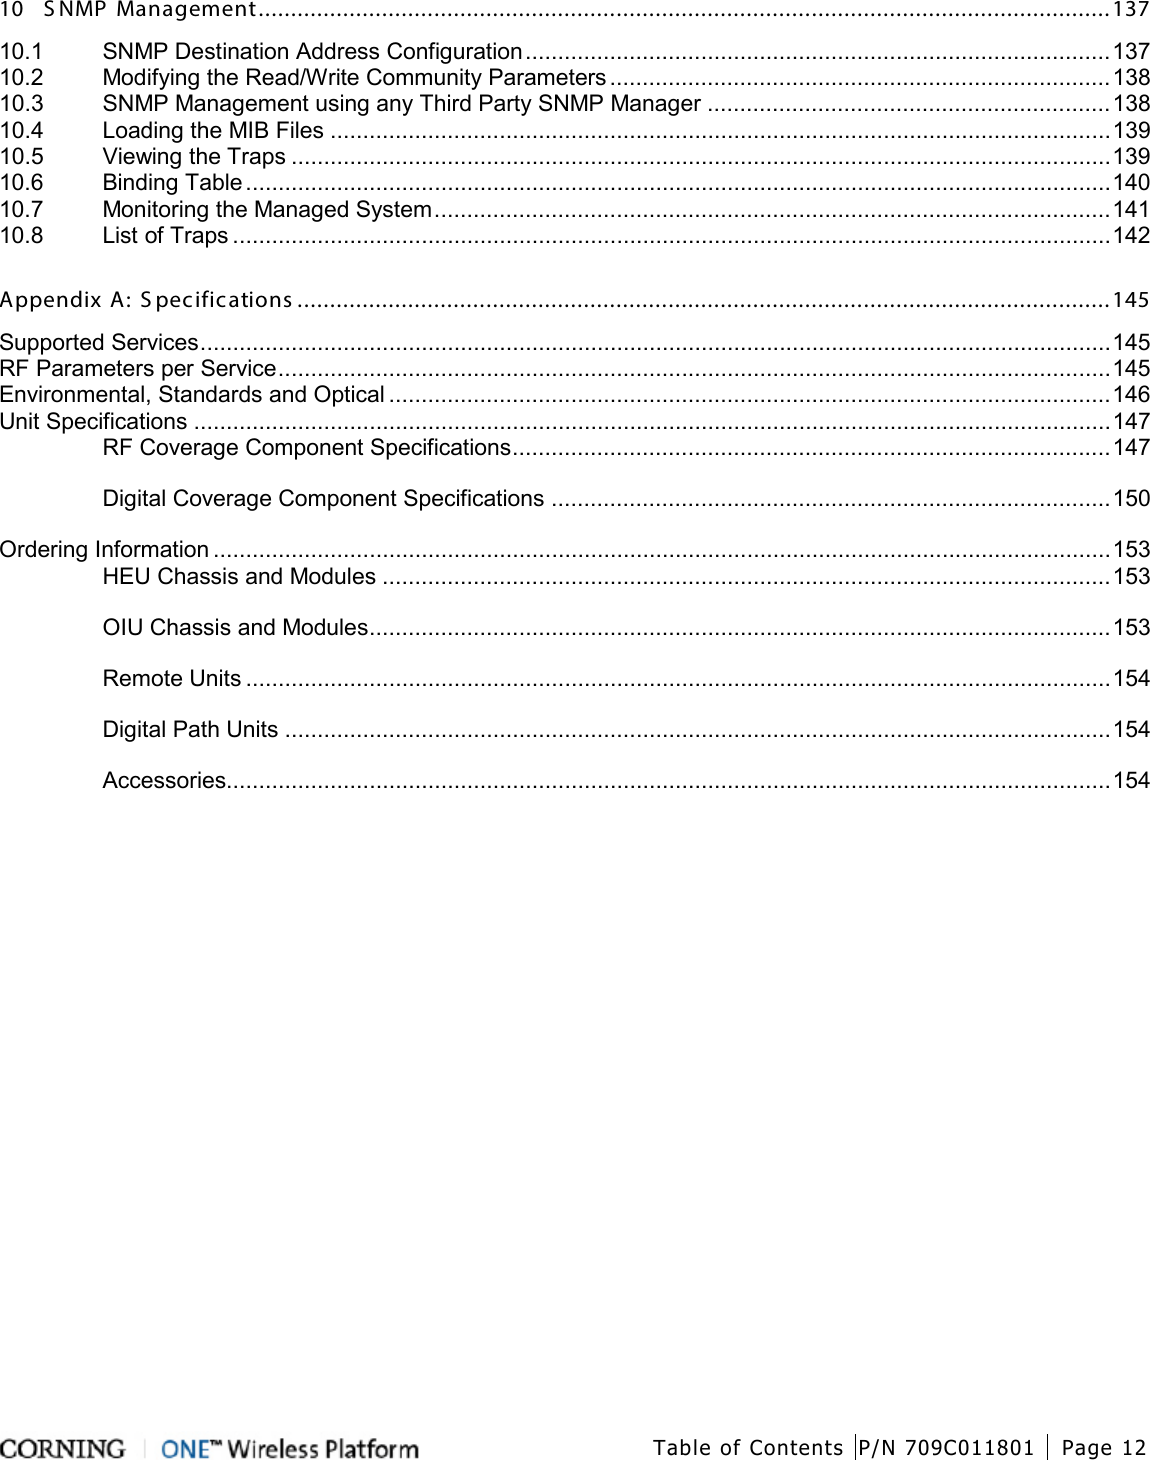  Table of Contents P/N 709C011801 Page 12   10 S NMP Management ................................................................................................................................... 137 10.1 SNMP Destination Address Configuration .......................................................................................... 137 10.2 Modifying the Read/Write Community Parameters ............................................................................. 138 10.3 SNMP Management using any Third Party SNMP Manager .............................................................. 138 10.4 Loading the MIB Files ........................................................................................................................ 139 10.5 Viewing the Traps .............................................................................................................................. 139 10.6 Binding Table ..................................................................................................................................... 140 10.7 Monitoring the Managed System ........................................................................................................ 141 10.8 List of Traps ....................................................................................................................................... 142 Appendix A: S pecifications ............................................................................................................................. 145 Supported Services ............................................................................................................................................ 145 RF Parameters per Service ................................................................................................................................ 145 Environmental, Standards and Optical ............................................................................................................... 146 Unit Specifications ............................................................................................................................................. 147 RF Coverage Component Specifications ............................................................................................ 147 Digital Coverage Component Specifications ...................................................................................... 150 Ordering Information .......................................................................................................................................... 153 HEU Chassis and Modules ................................................................................................................ 153 OIU Chassis and Modules .................................................................................................................. 153 Remote Units ..................................................................................................................................... 154 Digital Path Units ............................................................................................................................... 154 Accessories........................................................................................................................................ 154    